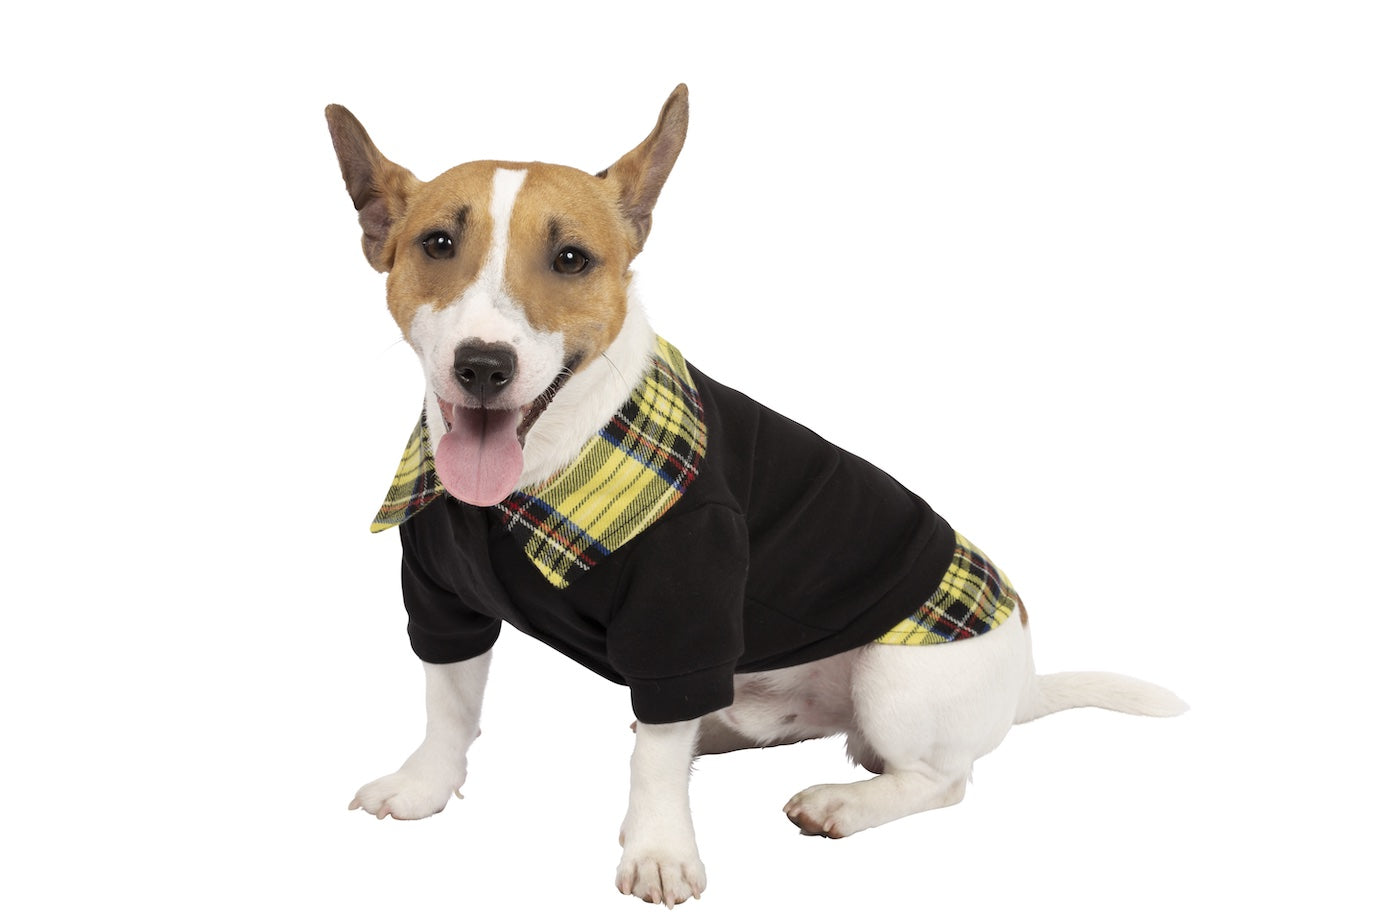 Blade - Sweatshirt for dogs in cotton and tartan patterned pure virgin wool details.